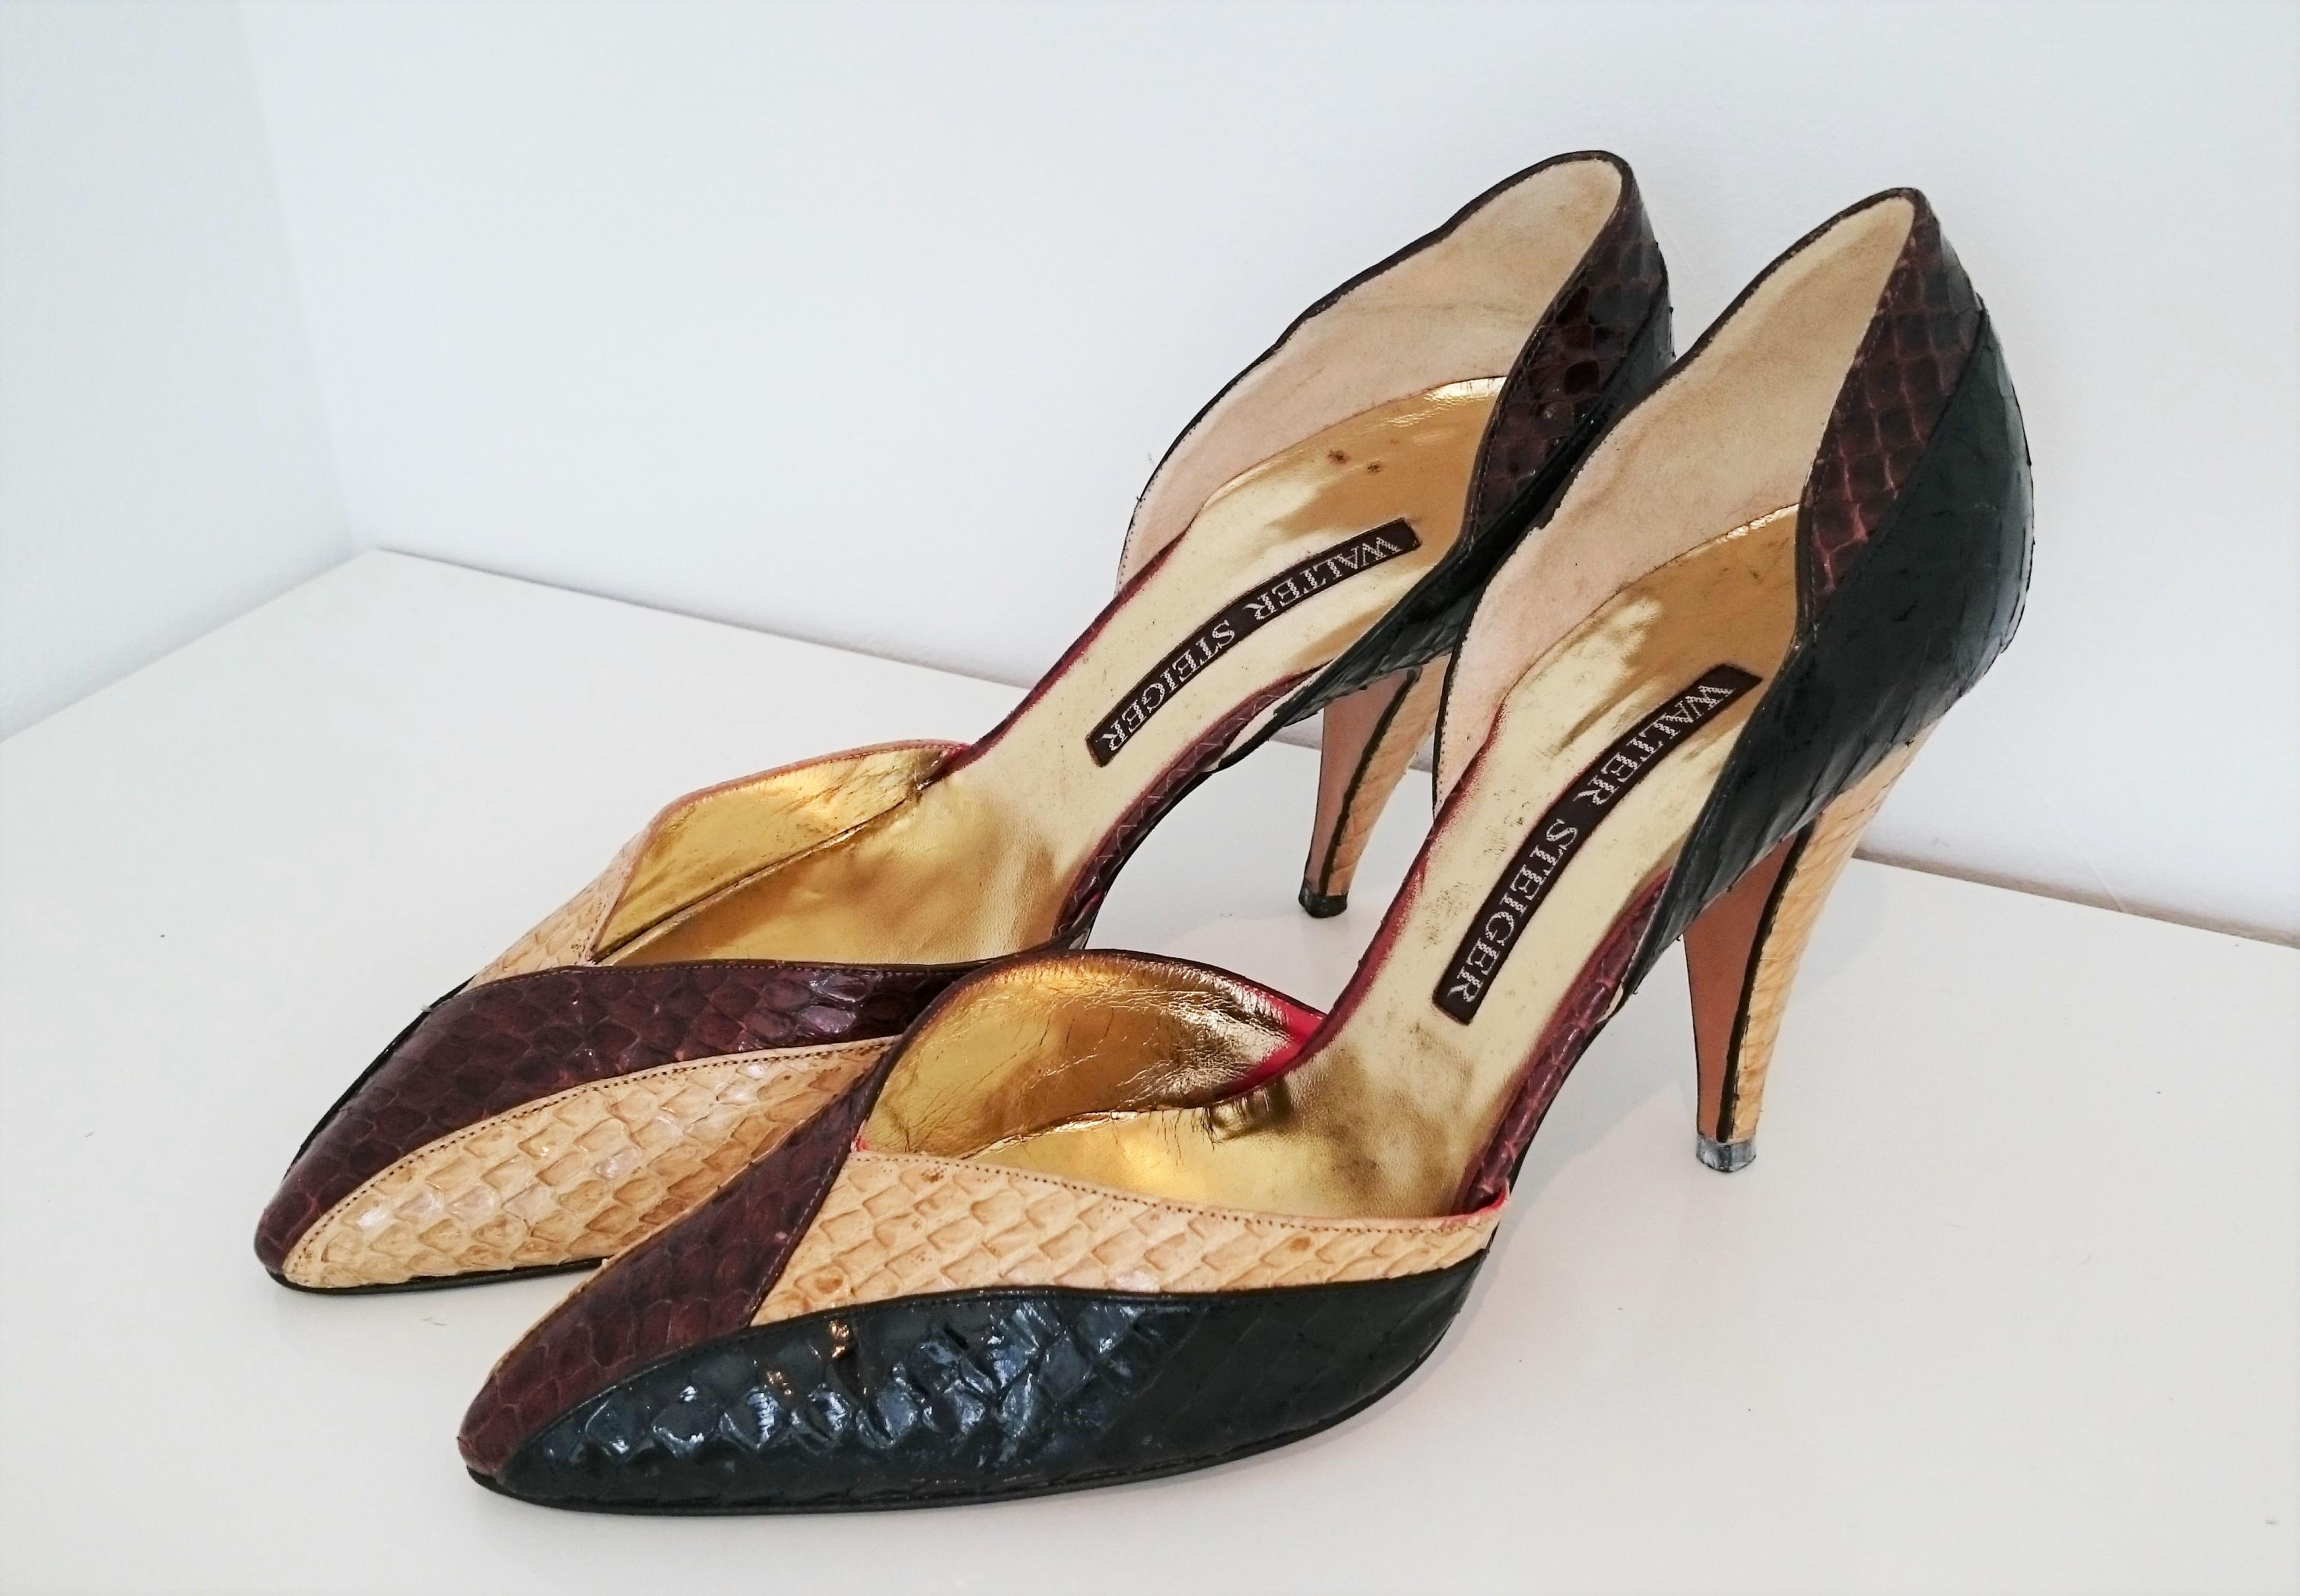 Walter Steiger Python Tricolor Heels. 
Colors: Brown Chocolate, Black and Beige Vanilla.
Conditions: Some wear signs insole and in the outside sole. But excellent conditions in the rest of the shoes.
Size 39 1/2 (EU)
Made in Italy